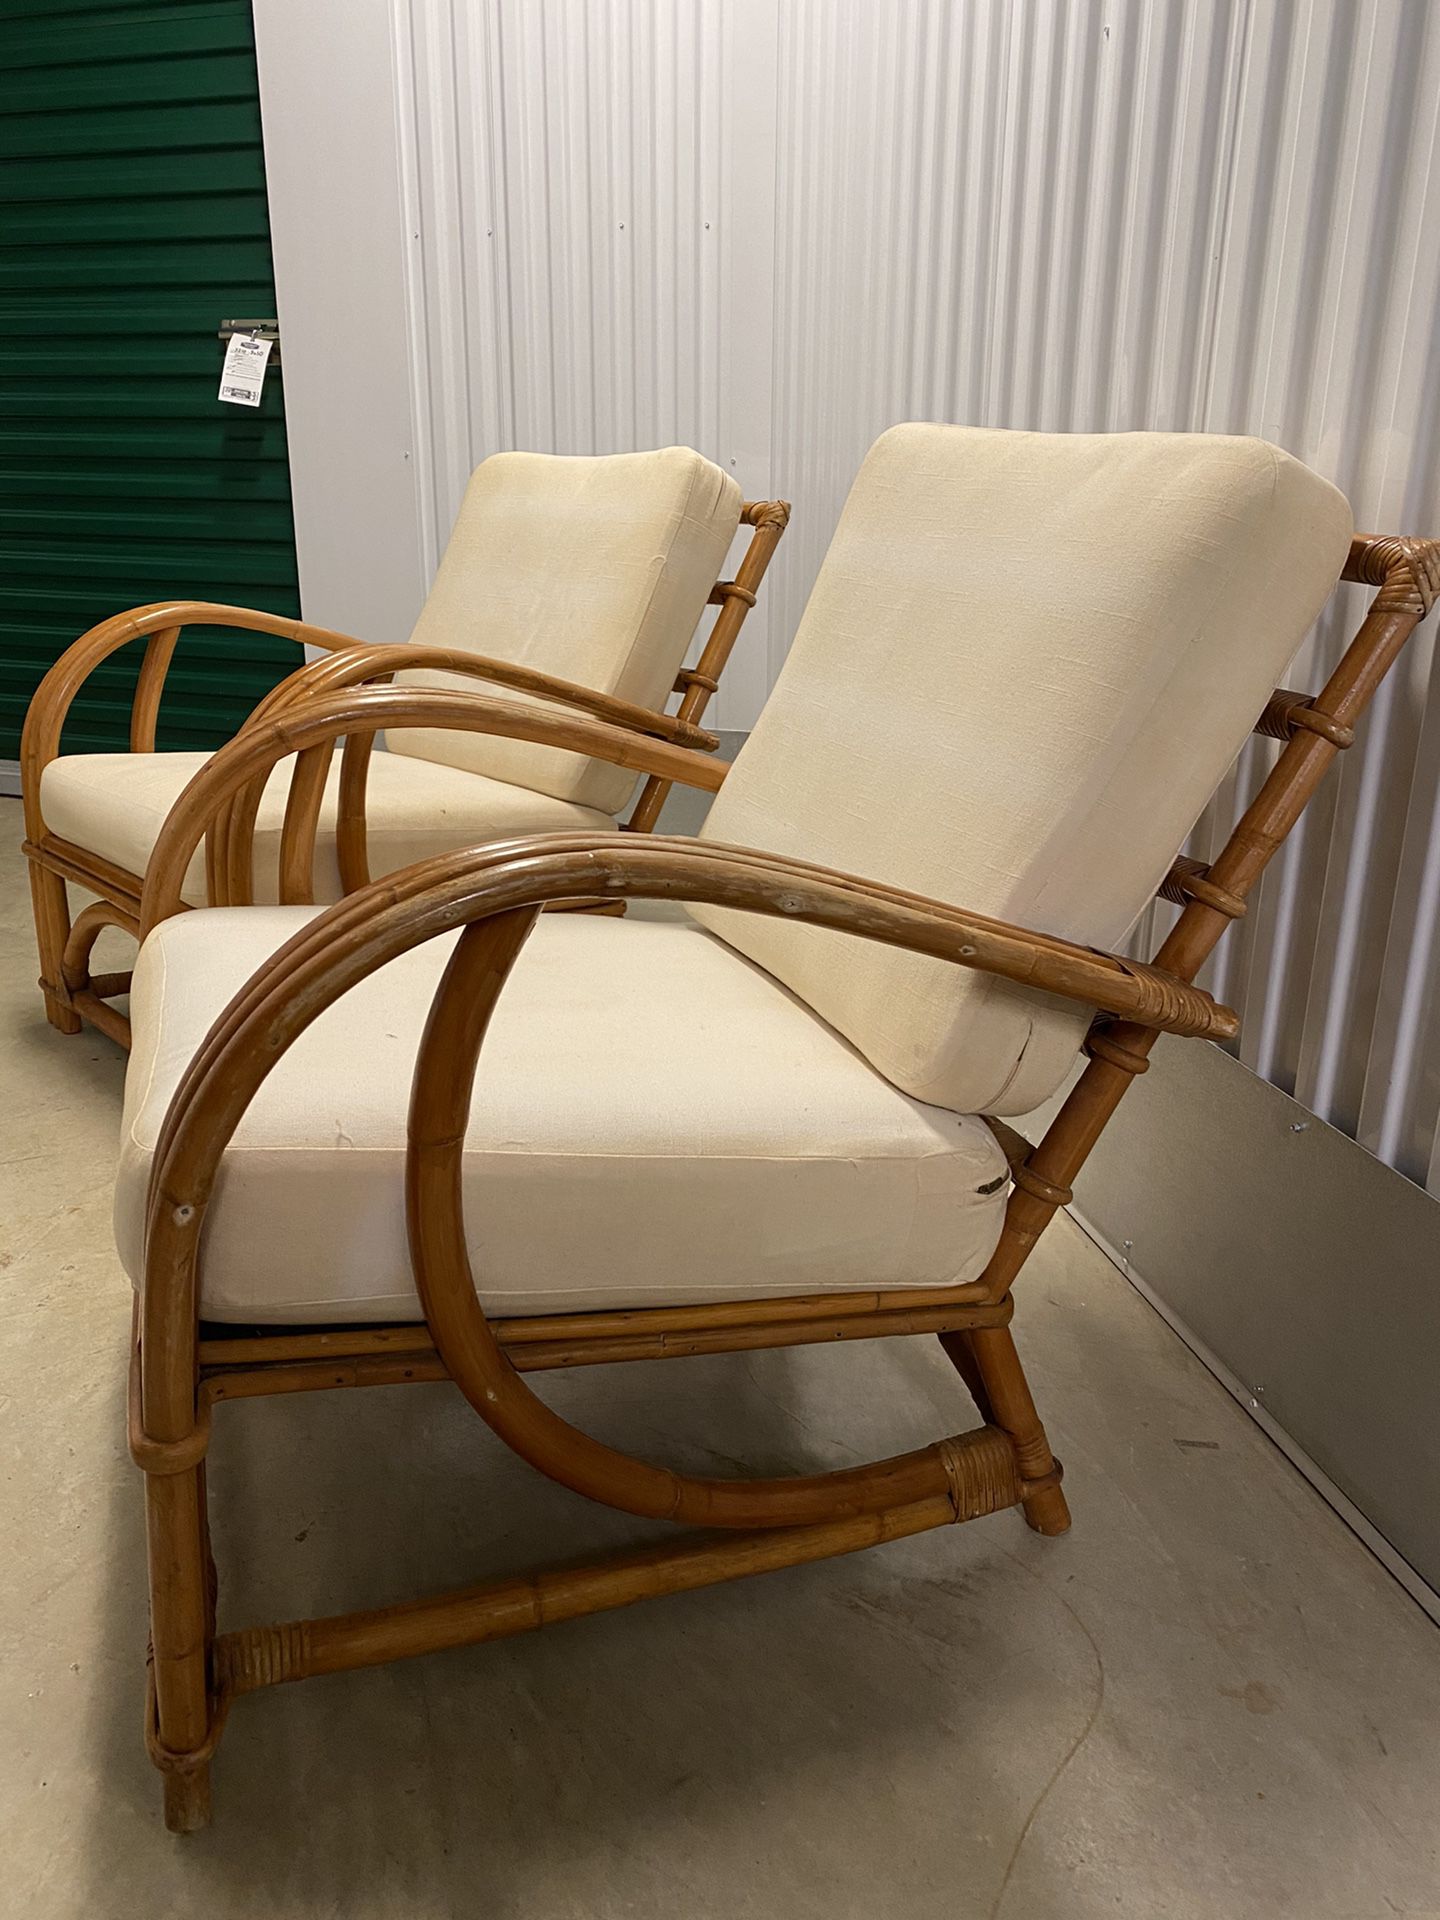 Pair Vintage Bamboo Chairs